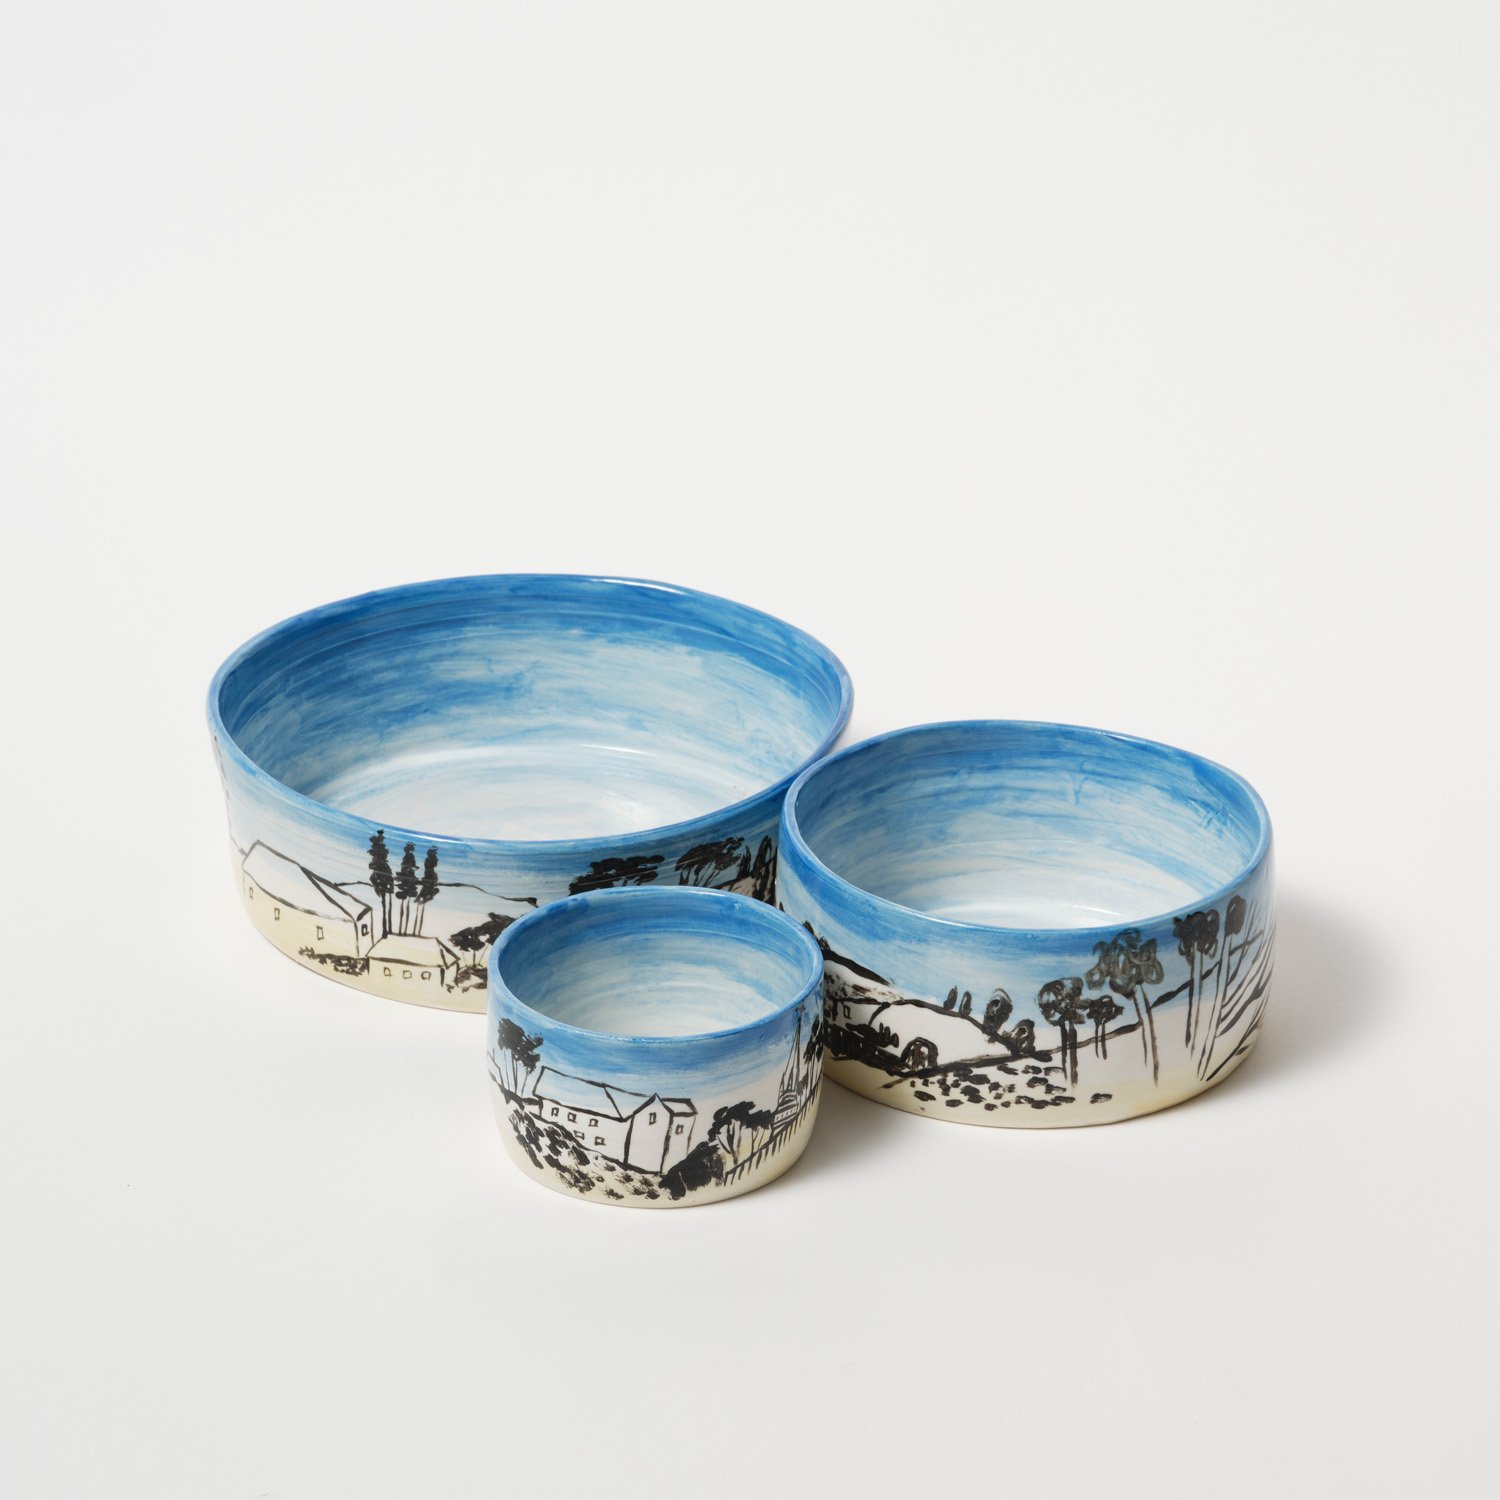 The rolling hills of Europe – Ceramic Bowl Set  (also pictured as collection) – Small 9cm x 5cm x 9cm $200 Medium 14cm x 6cm x 14cm $300 Large $400 19cm x 6cm x 19cm or as a set $650